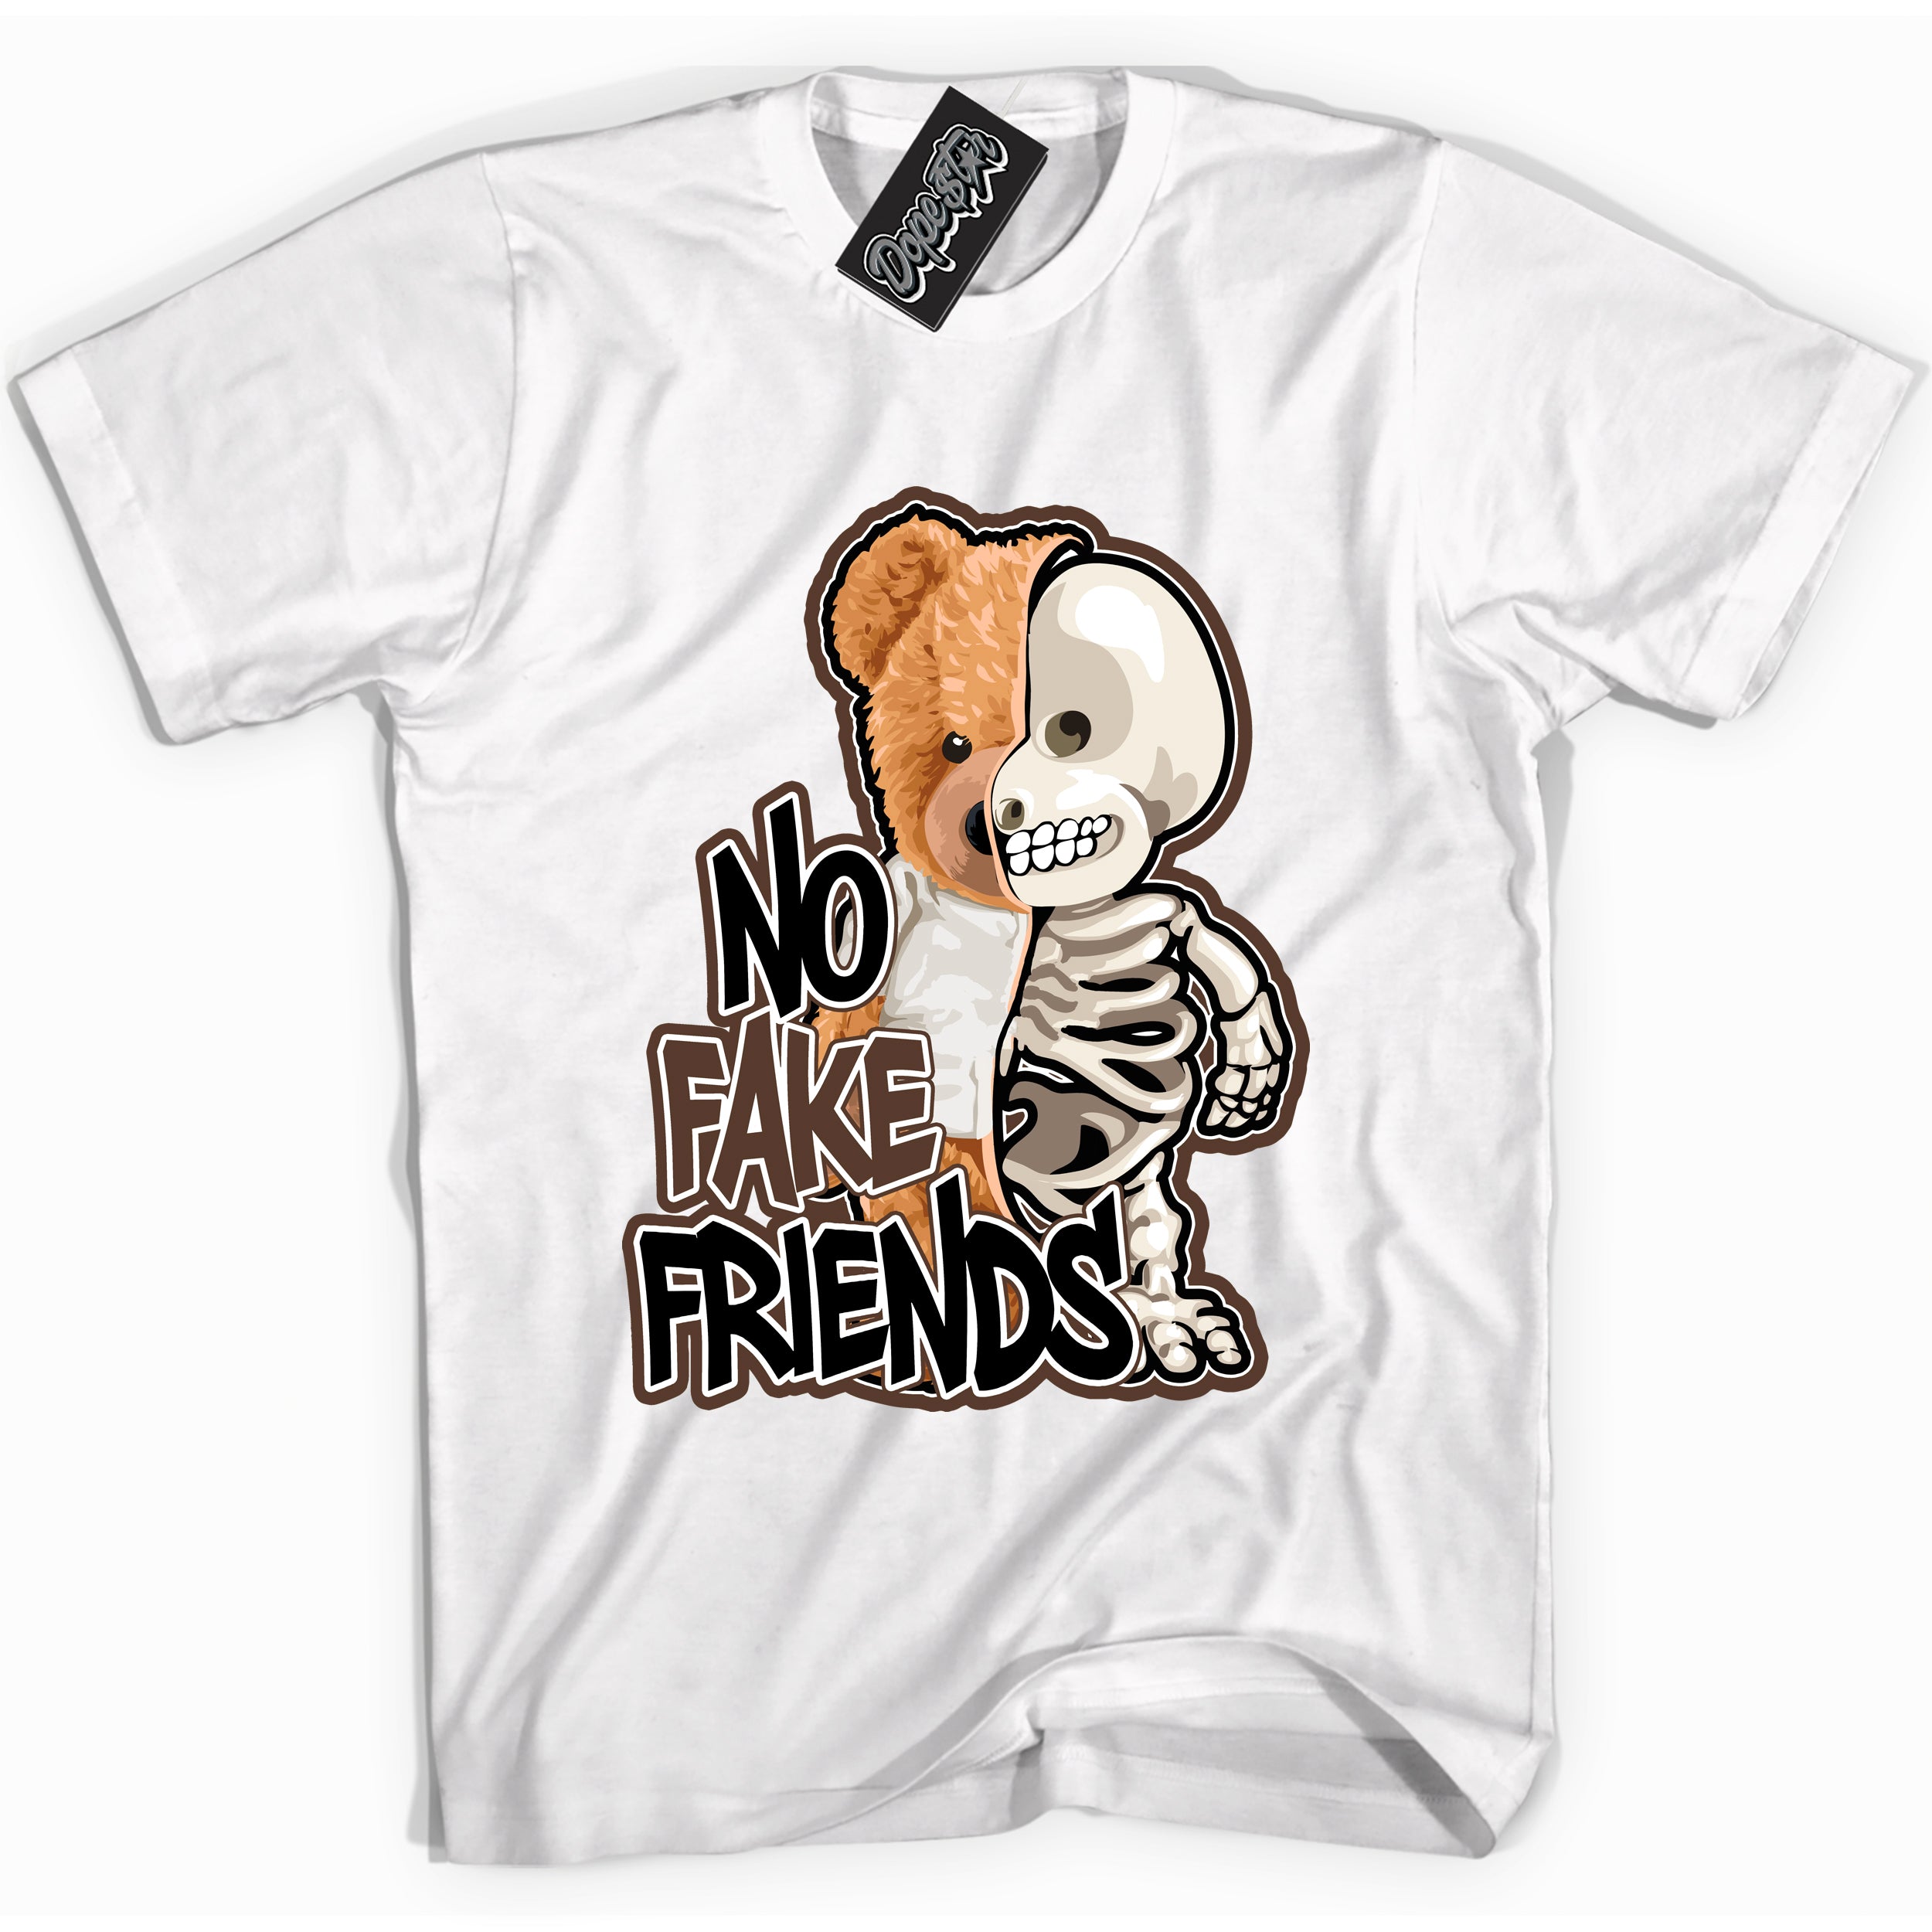 Cool White graphic tee with “ No Fake Friends ” design, that perfectly matches Palomino 1s sneakers 